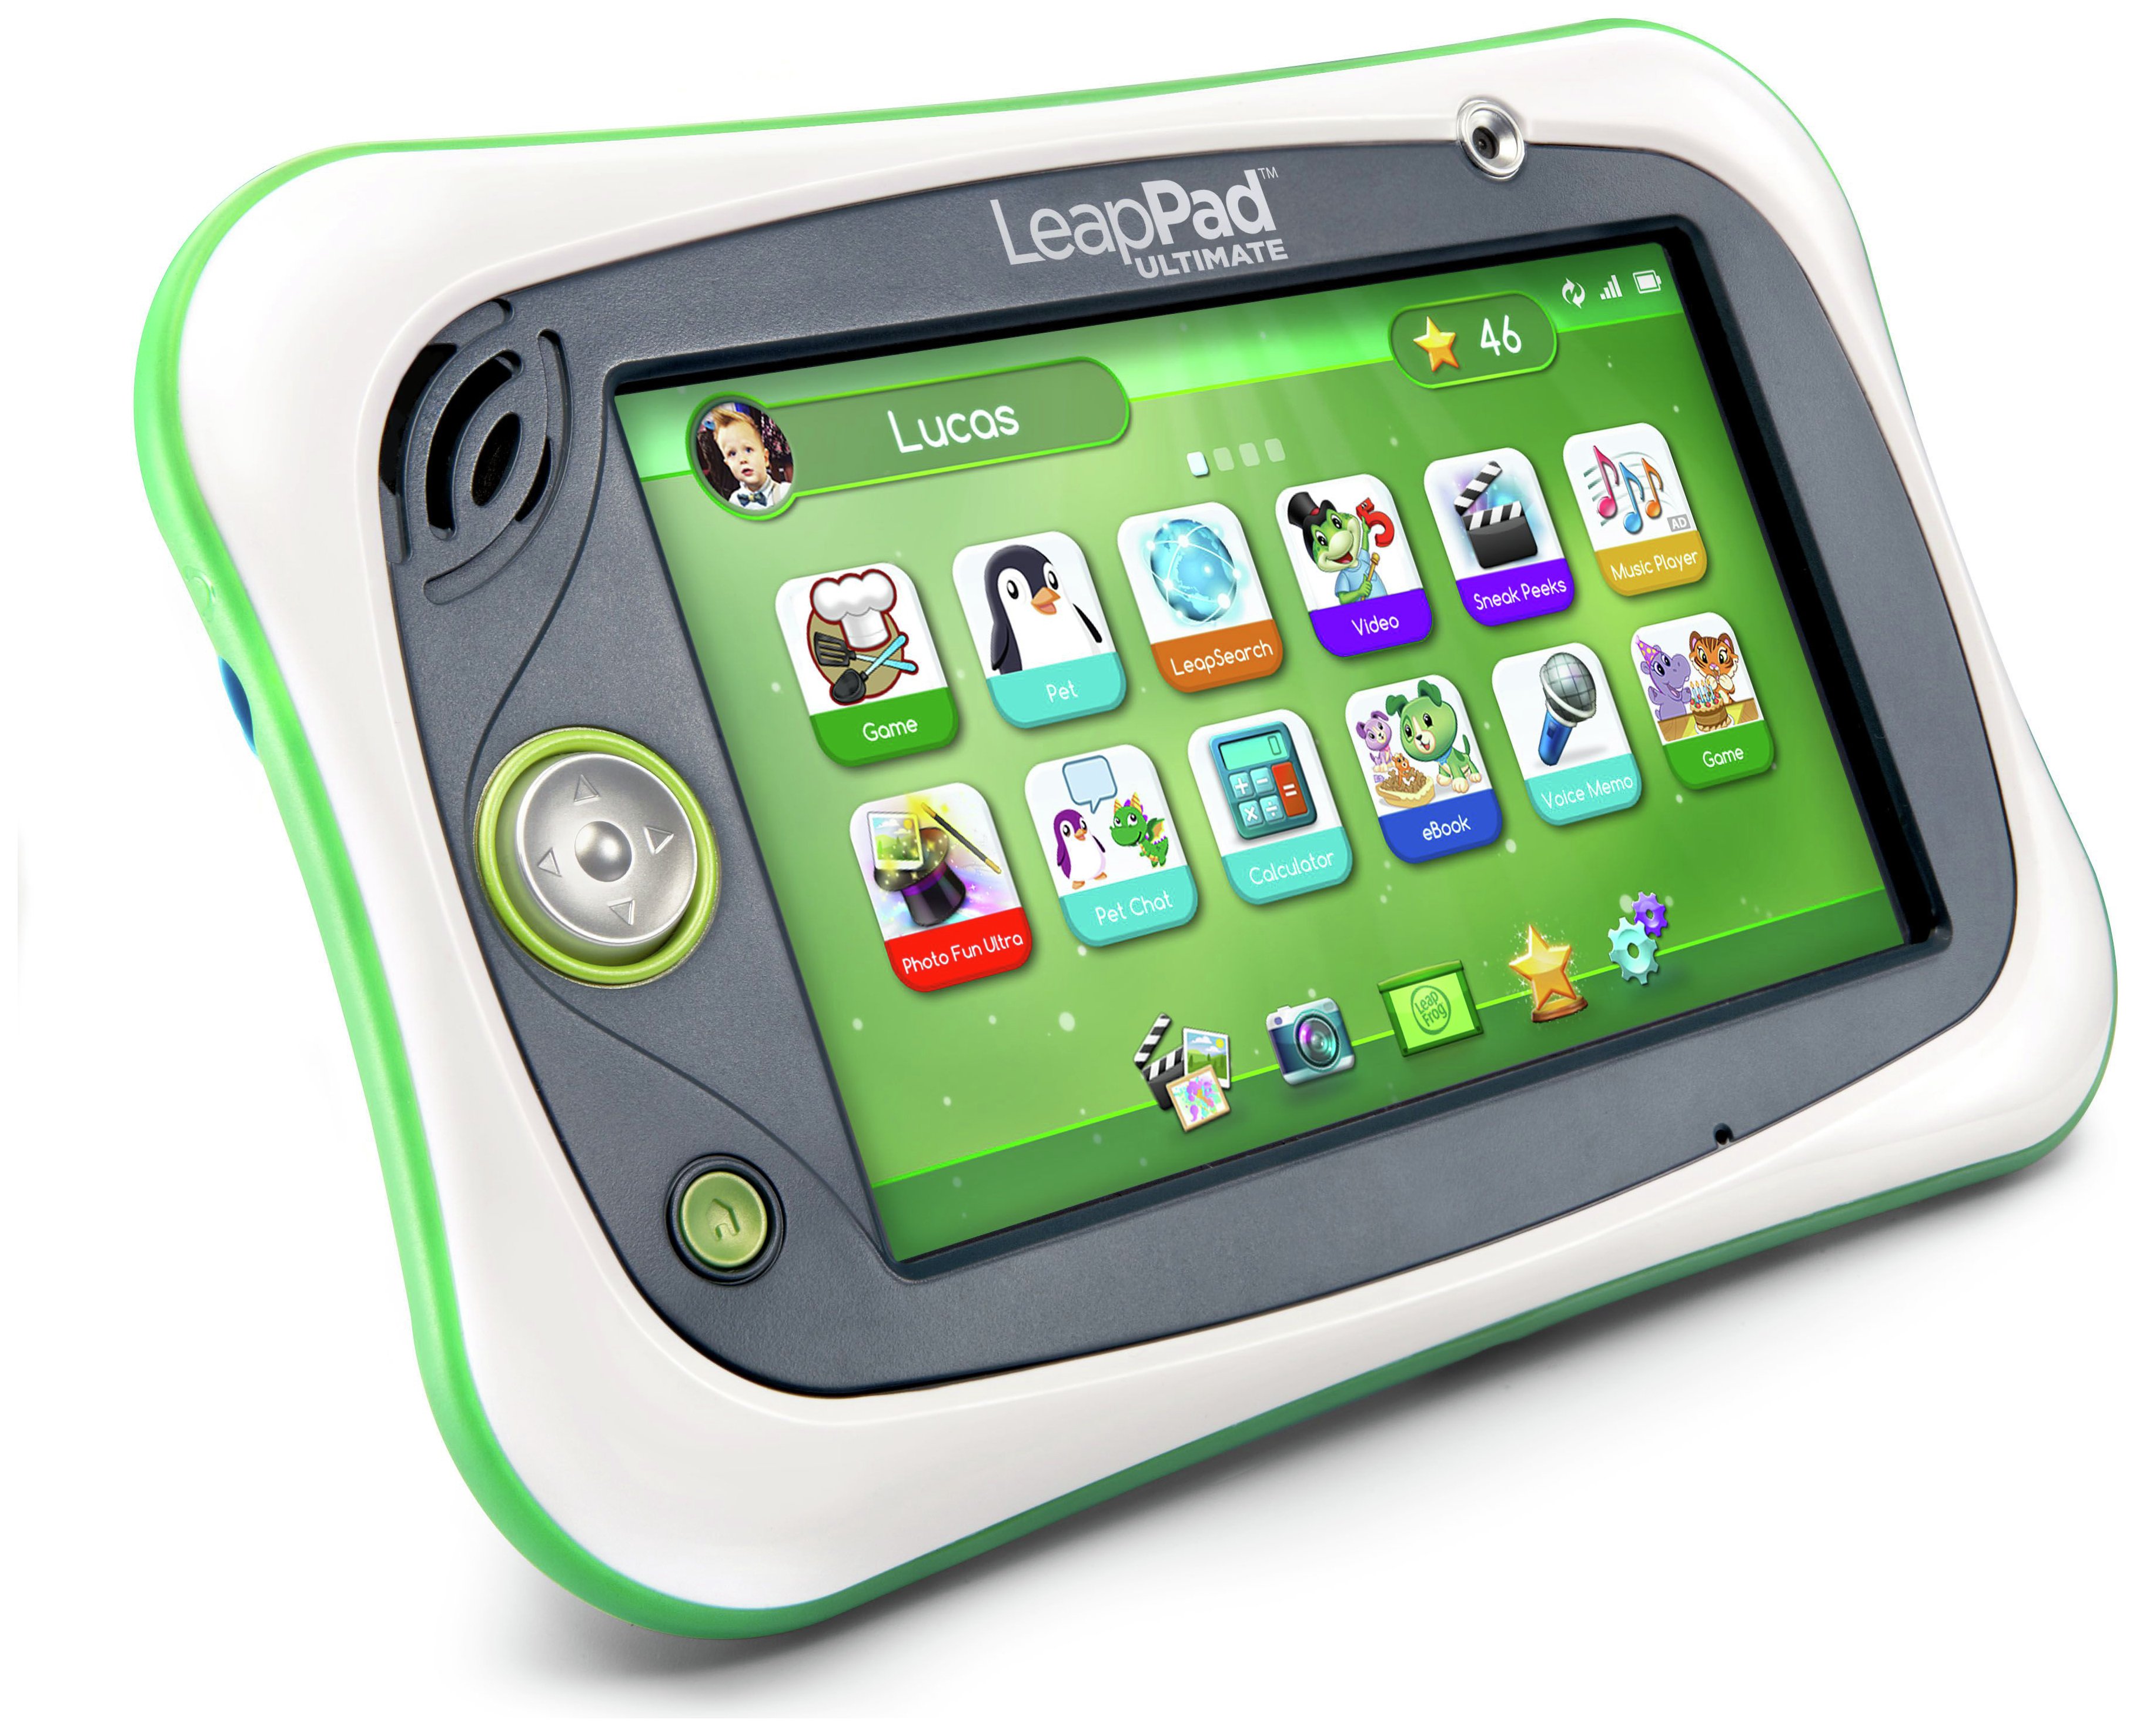 leapfrog products for 3 year olds